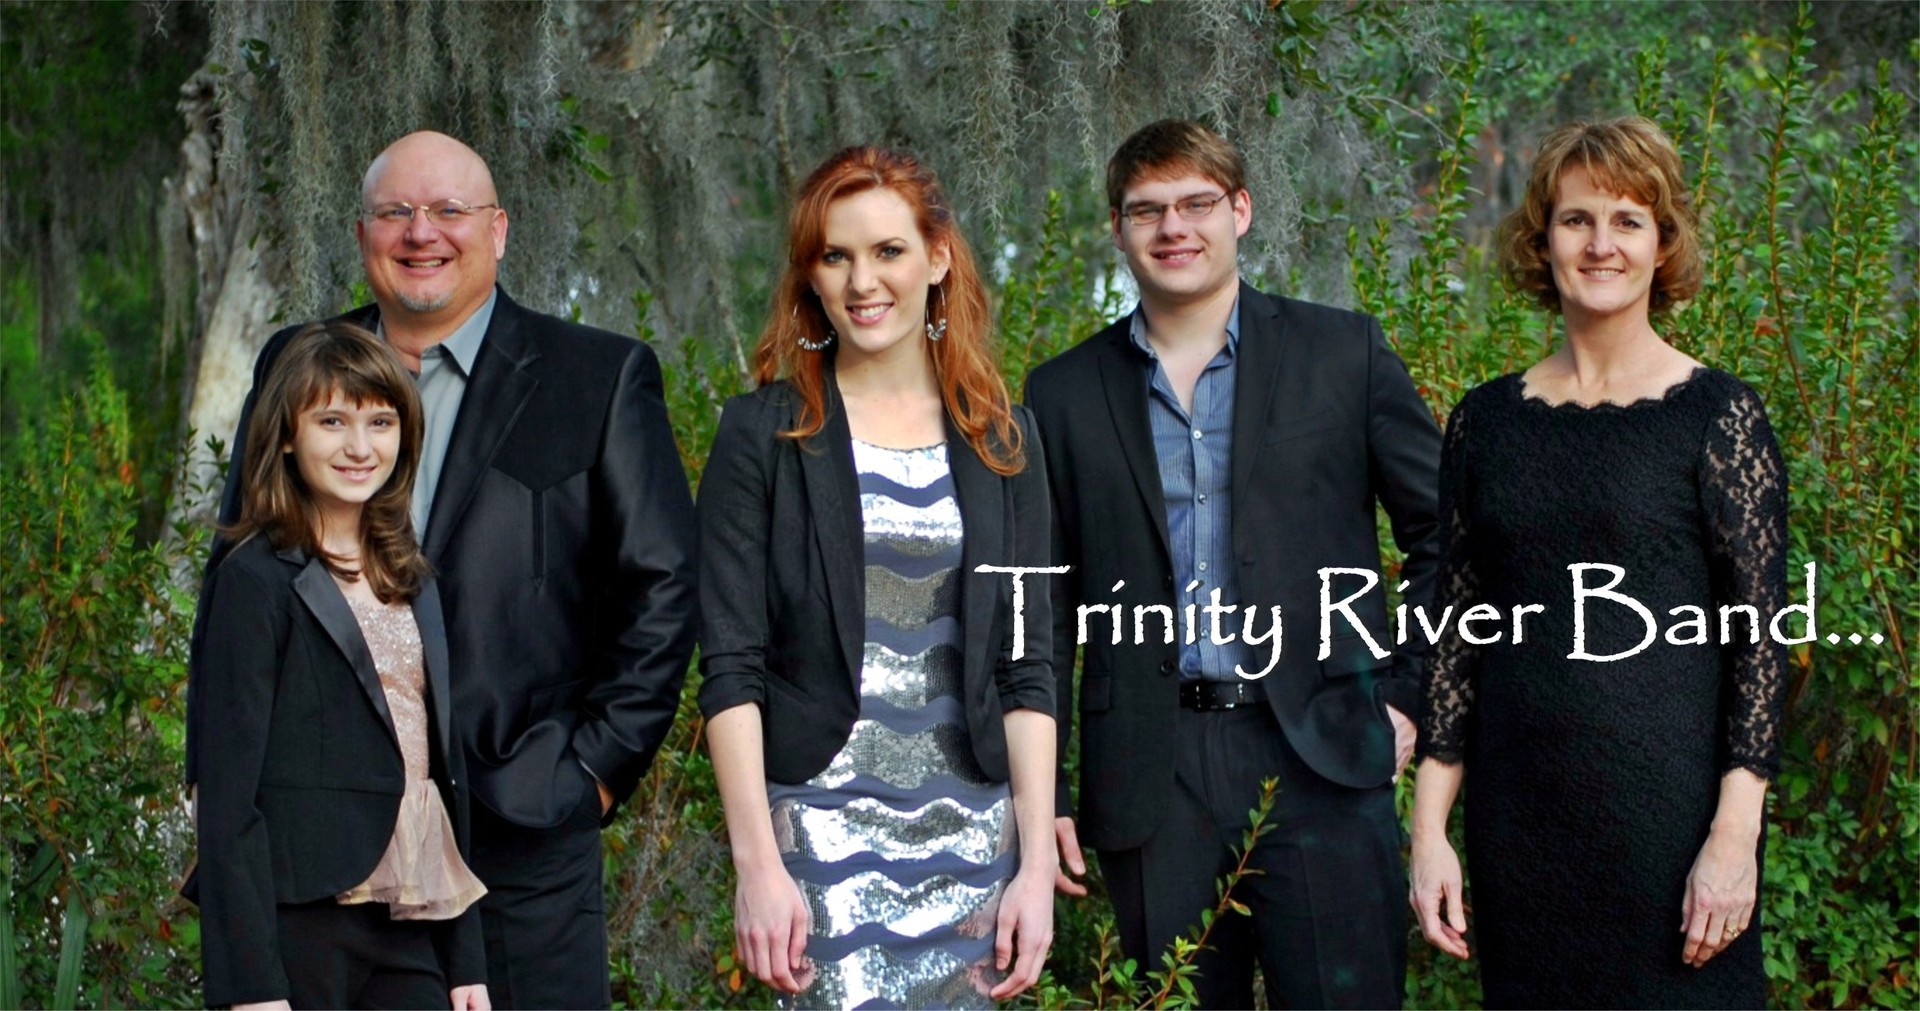 Strictly Country Magazine's Trinity River Band title